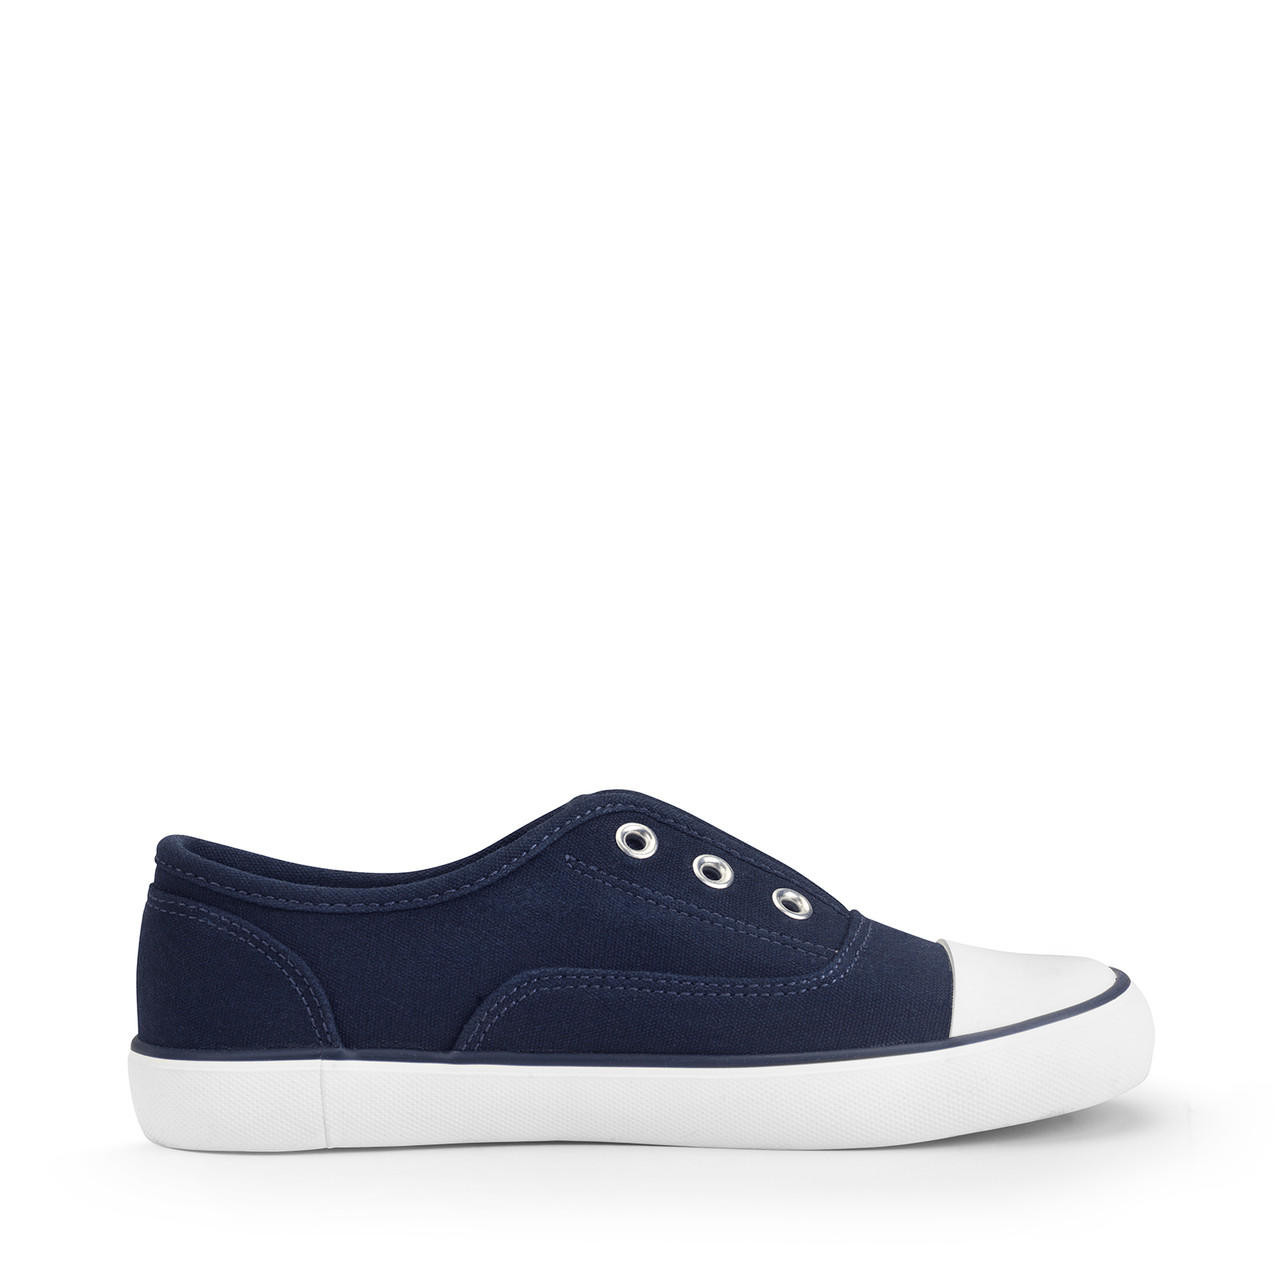 Postcard, Navy blue closed slip on canvas shoes